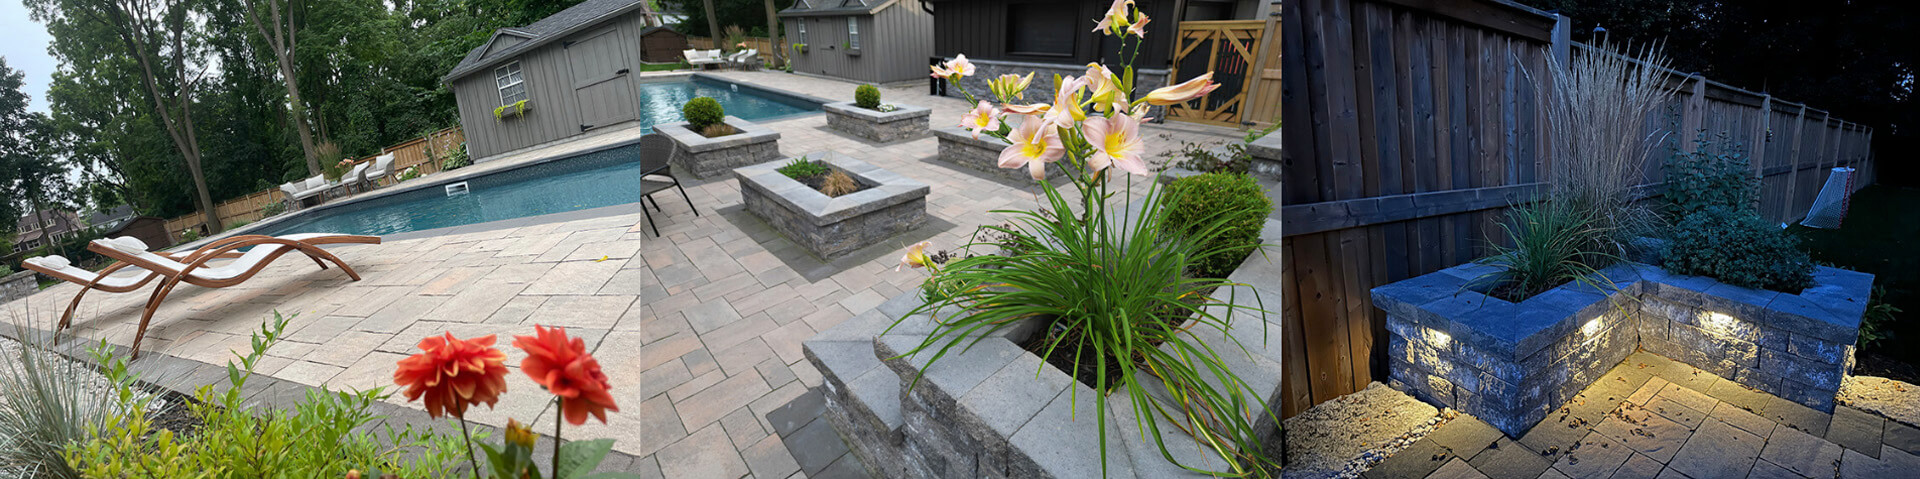 outdoor lighting hardscaping pool surround patio Kawartha armour stone to anchor the area Permacon Kensington paver , Permacon Celtic wall